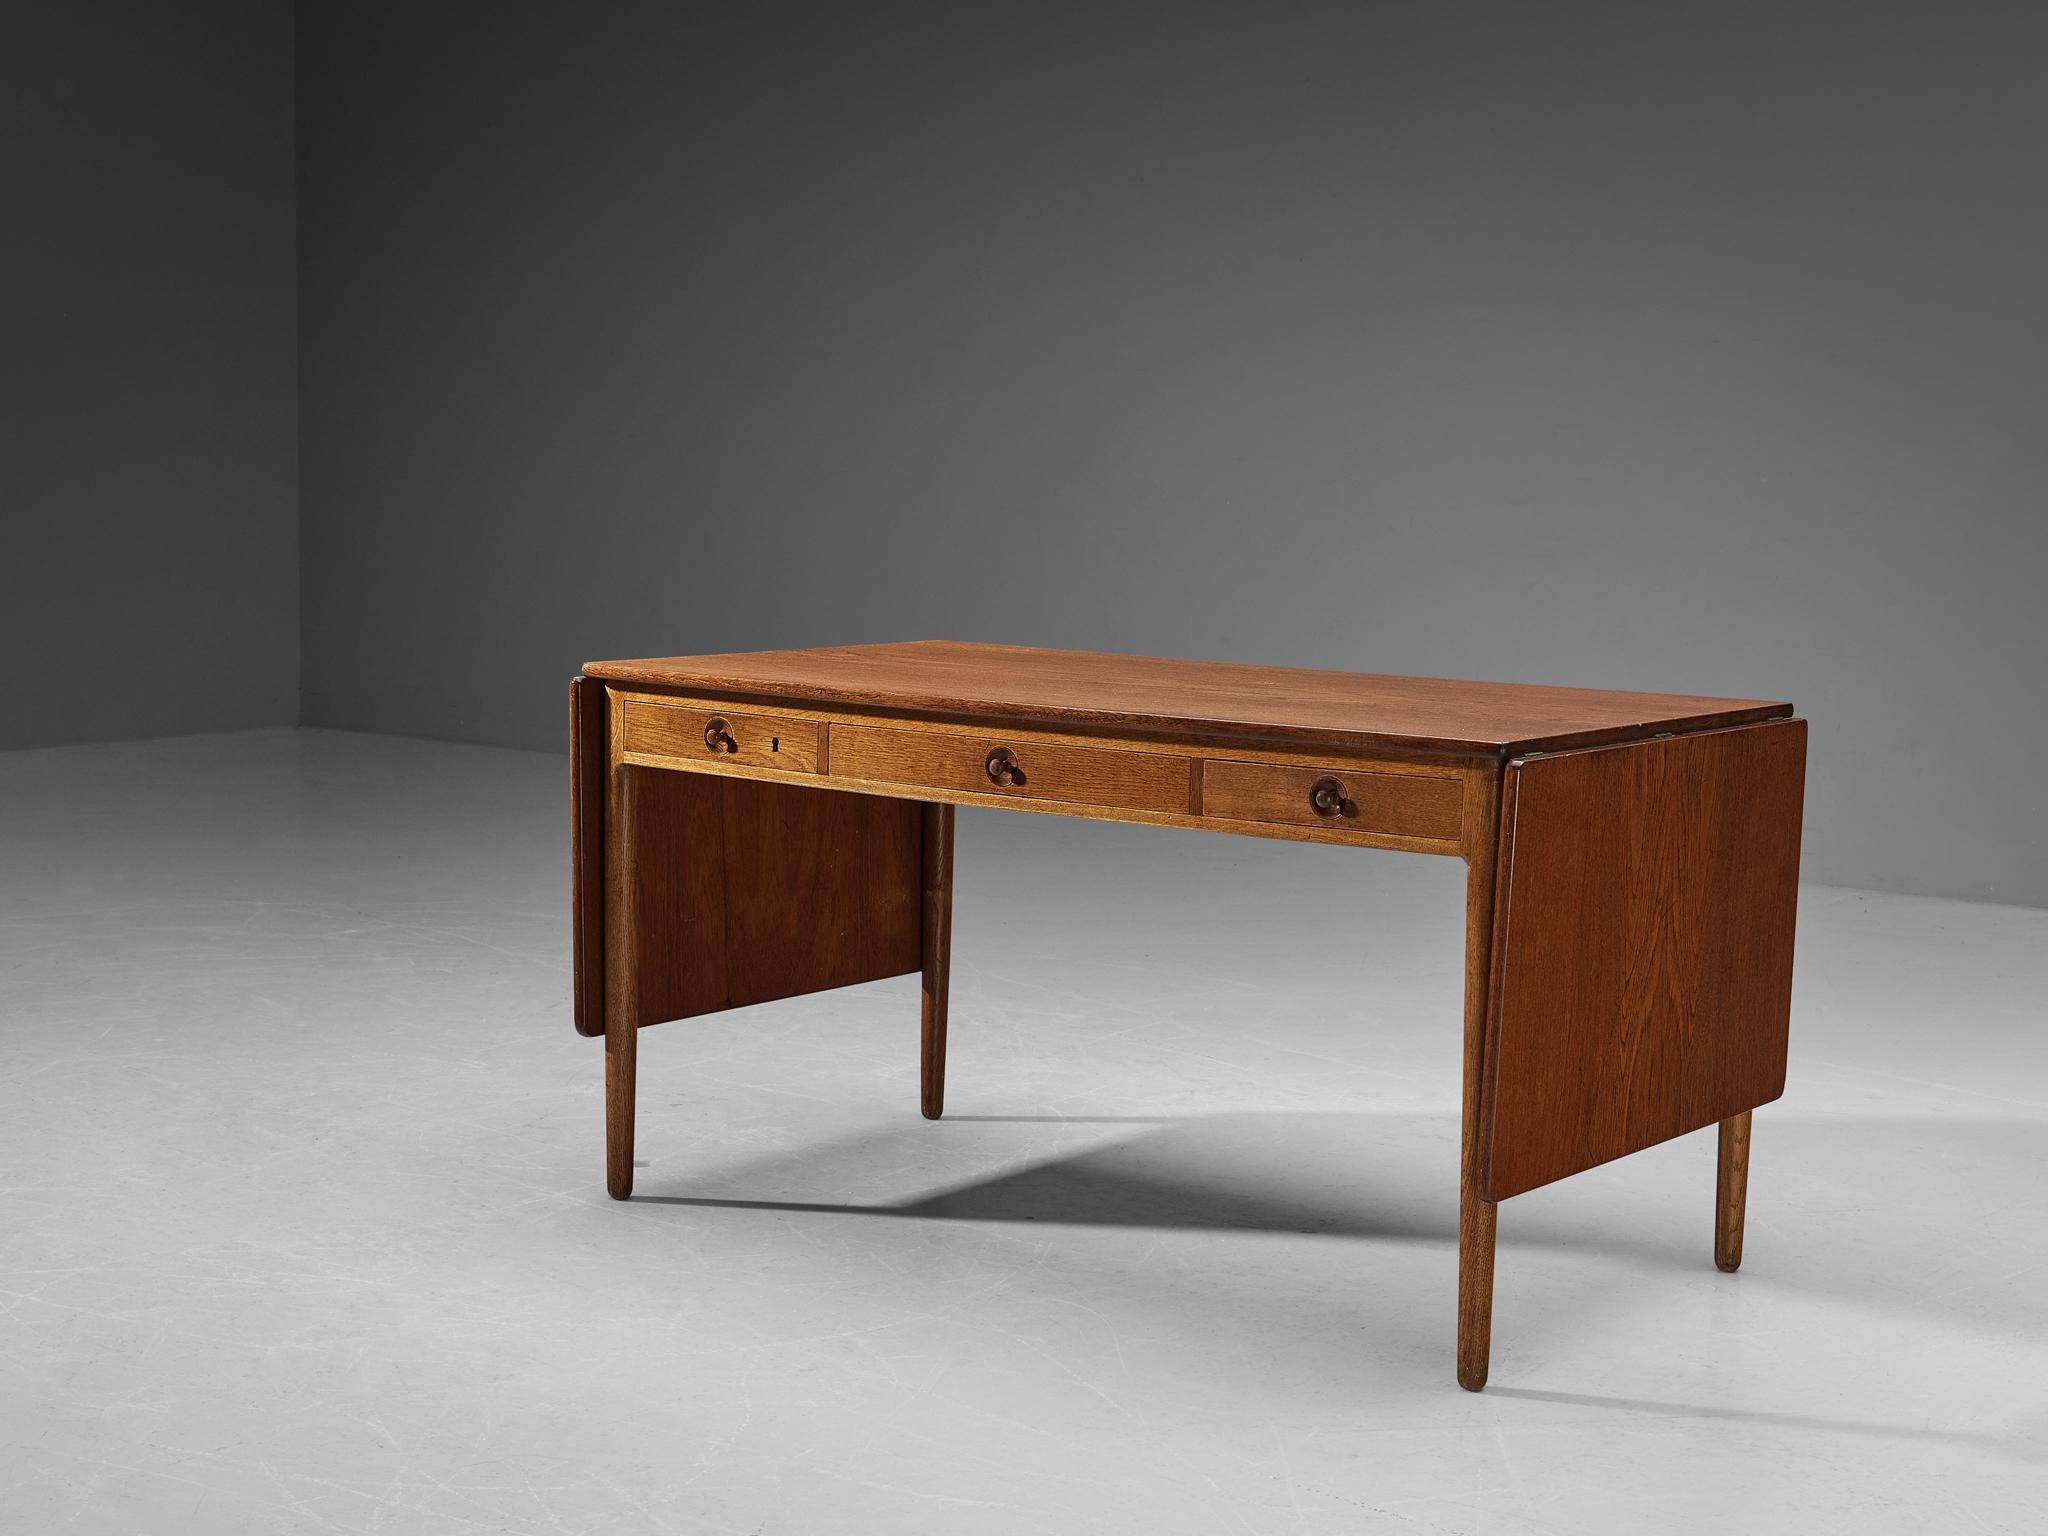 Hans J. Wegner for Andreas Tuck, desk, model 'AT305', solid oak, teak veneer, Denmark, 1955

Hans Wegner created a coherent table which is achieved by the implementation of purely geometric forms. The structure and arrangement of each individual